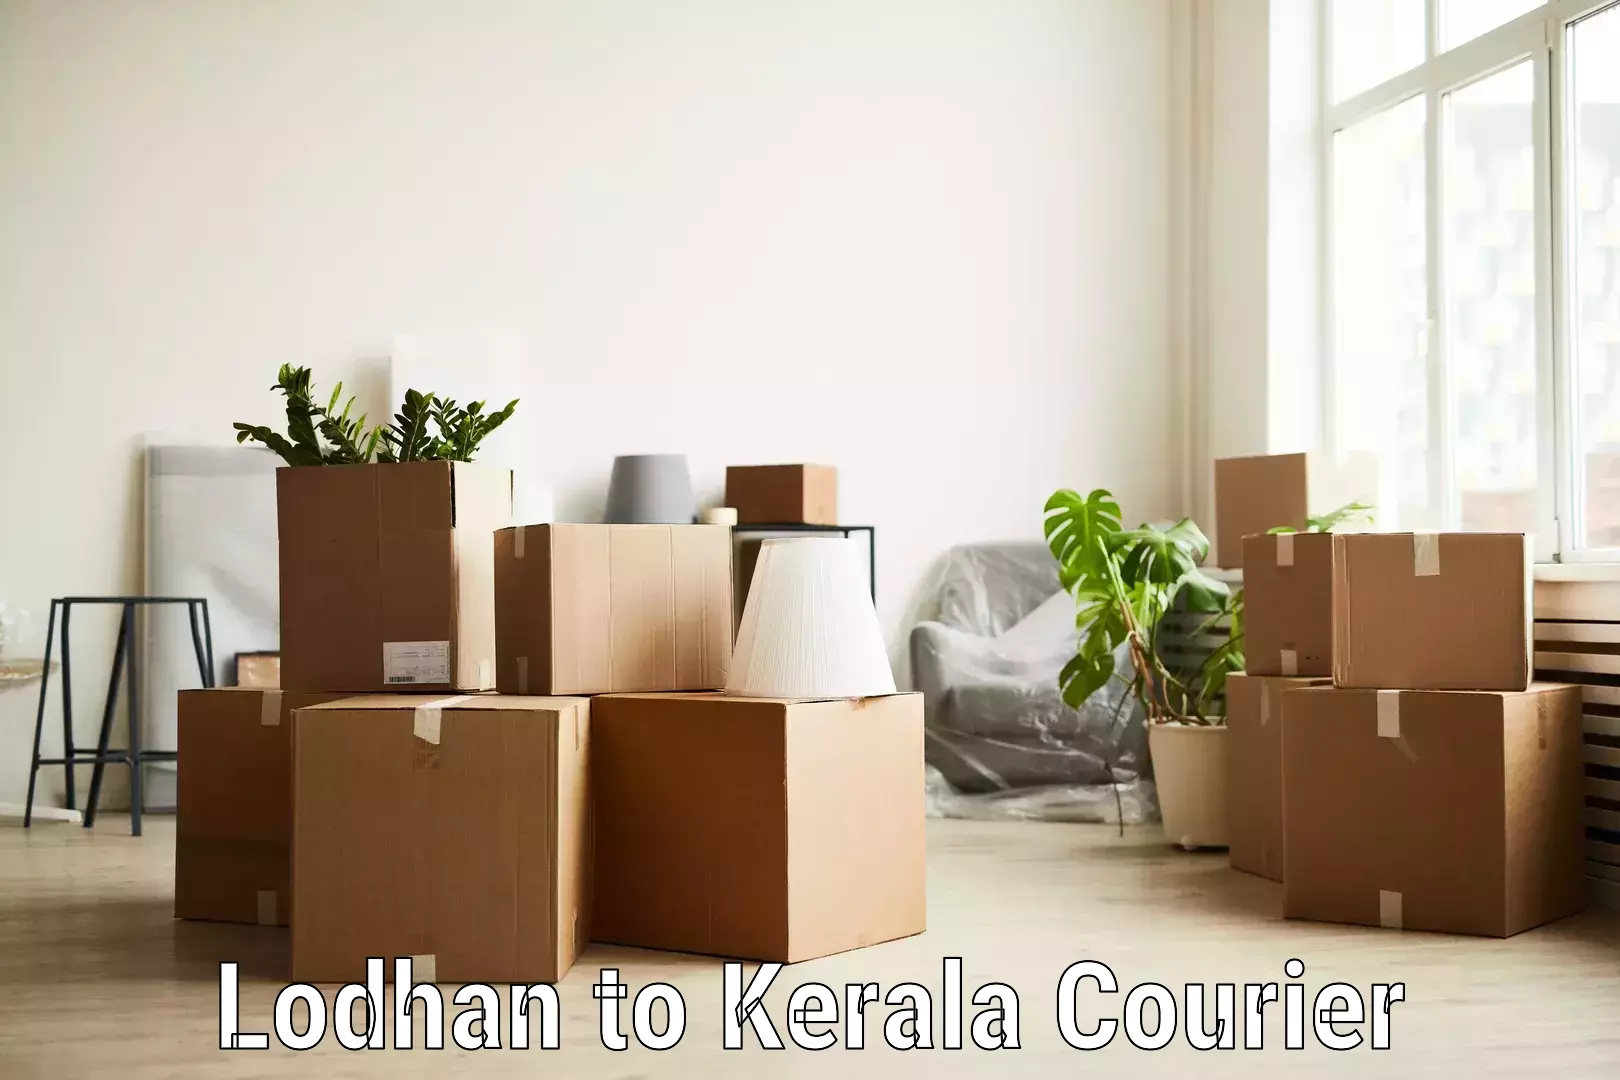 Professional courier services Lodhan to Cochin Port Kochi